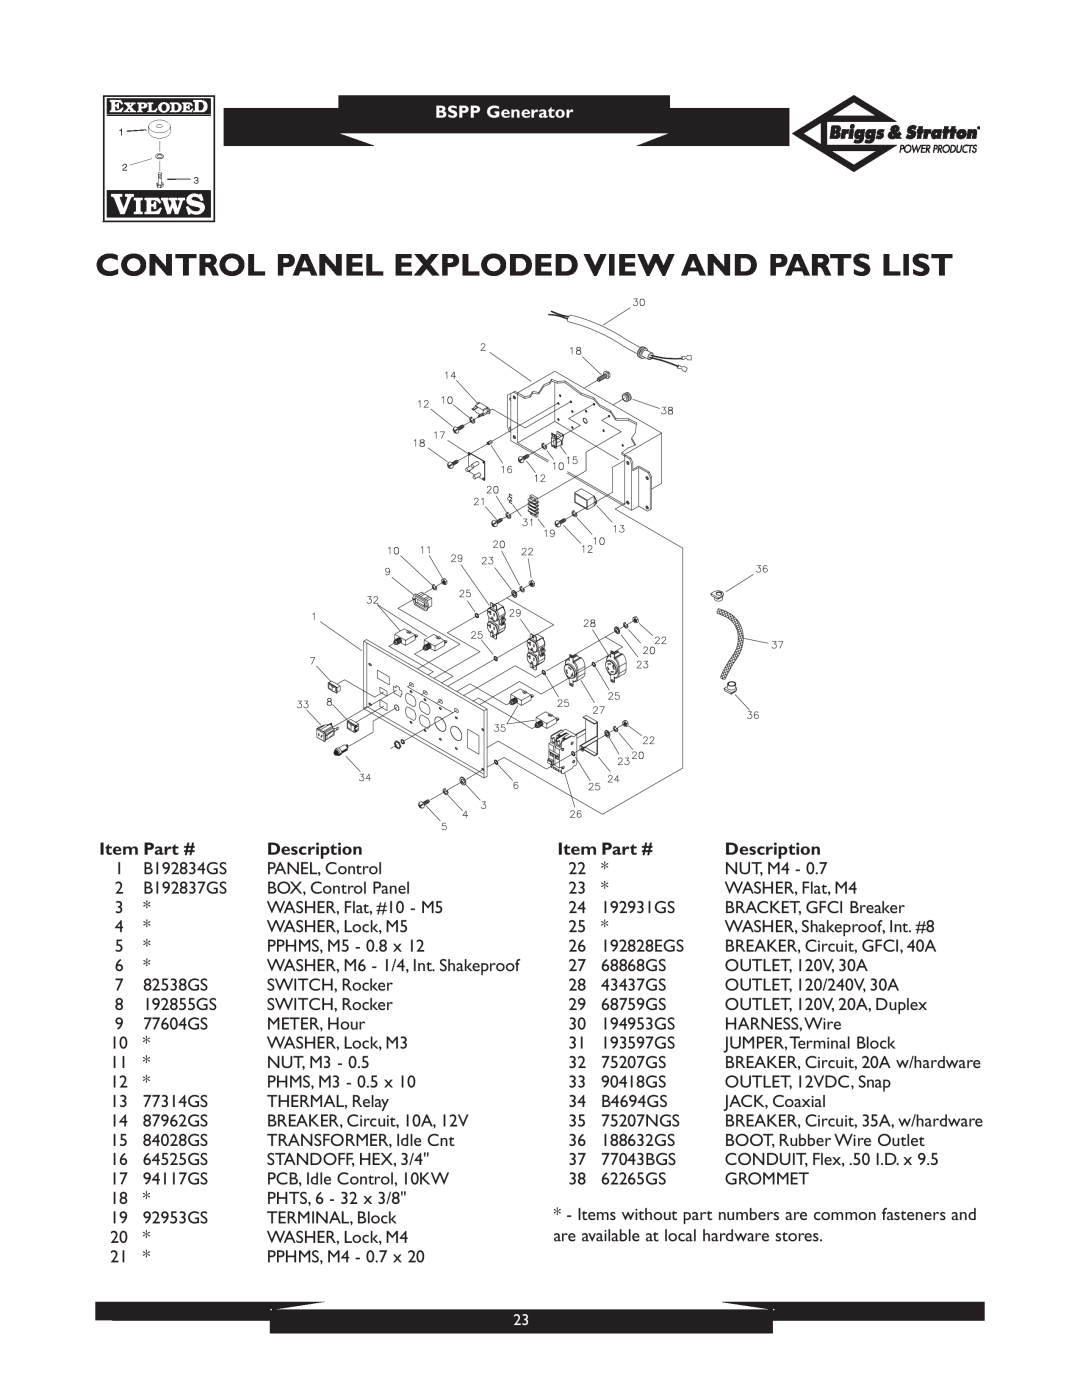 Briggs & Stratton PRO8000 owner manual Control Panel Exploded View And Parts List, BSPP Generator, Description 